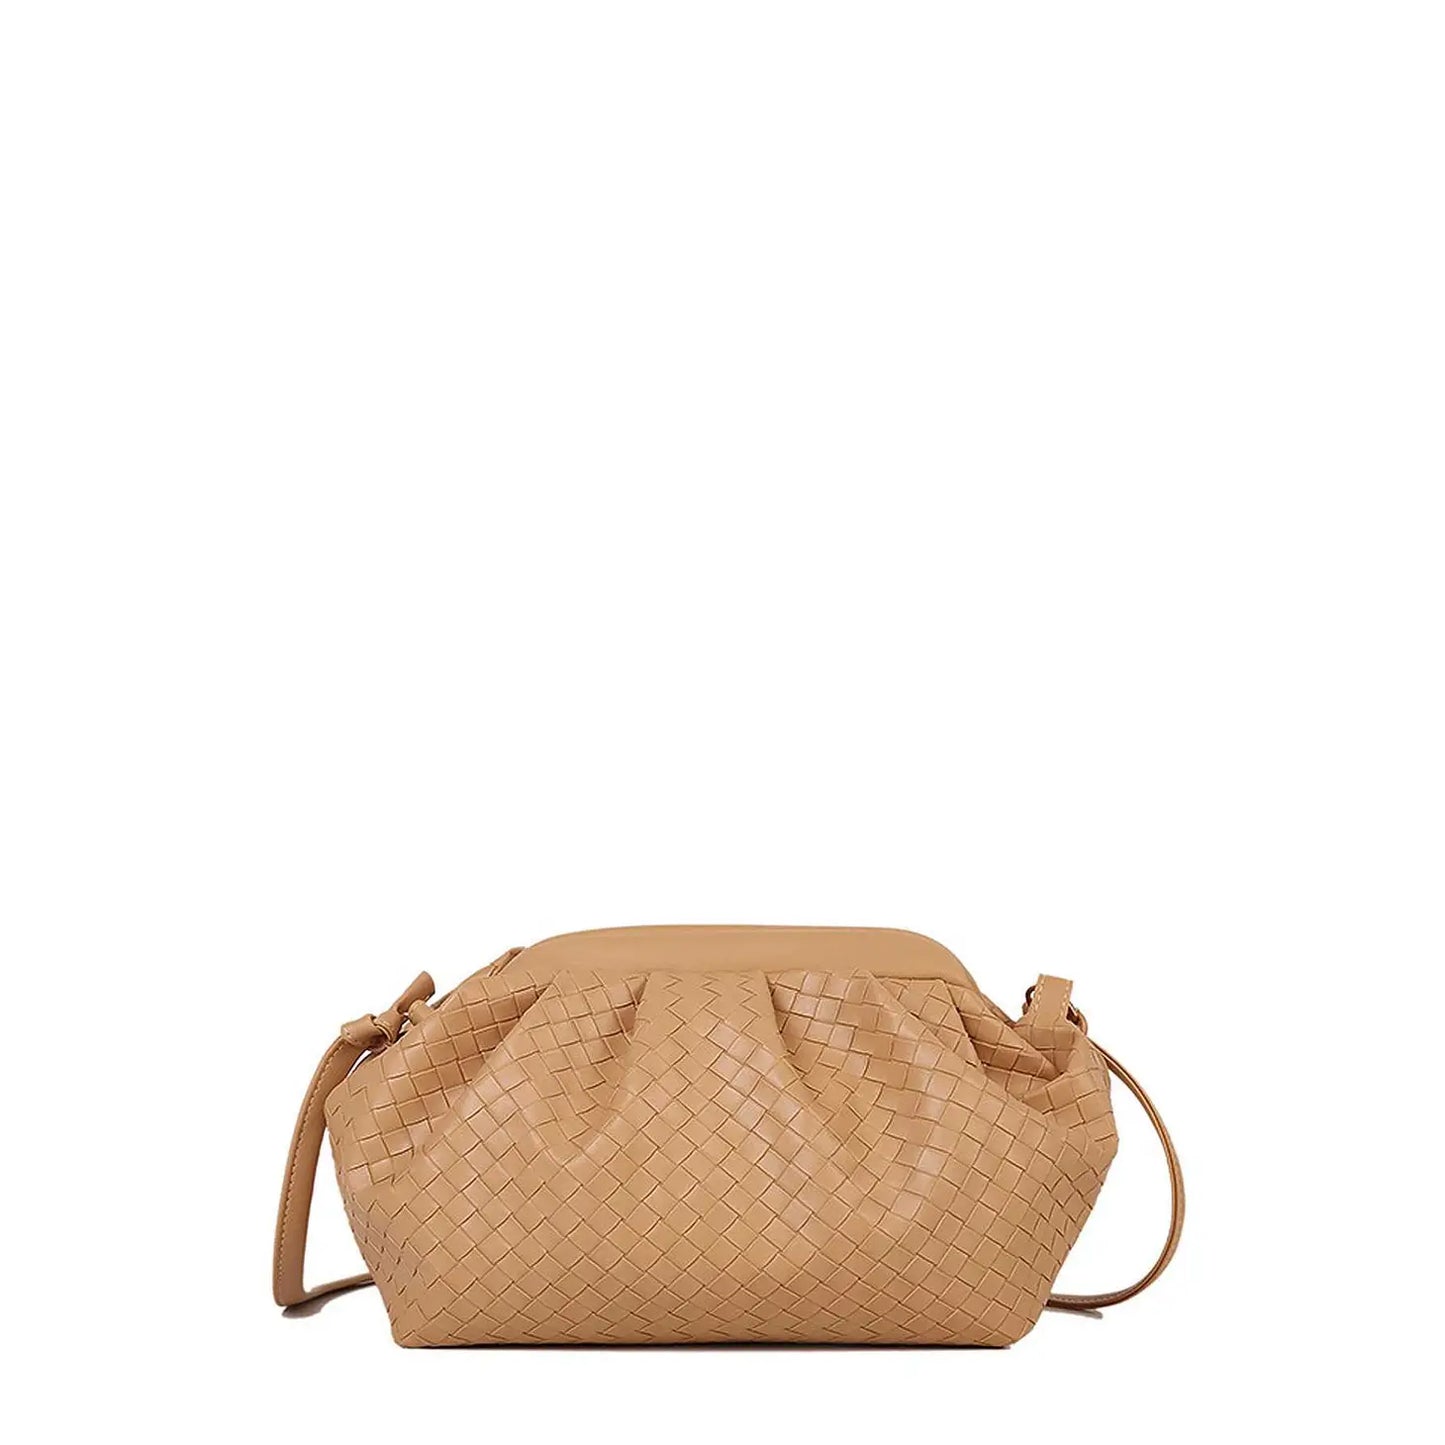 Load image into Gallery viewer, FADIVO NEW YORK Textured Crossbody Bag - beige
